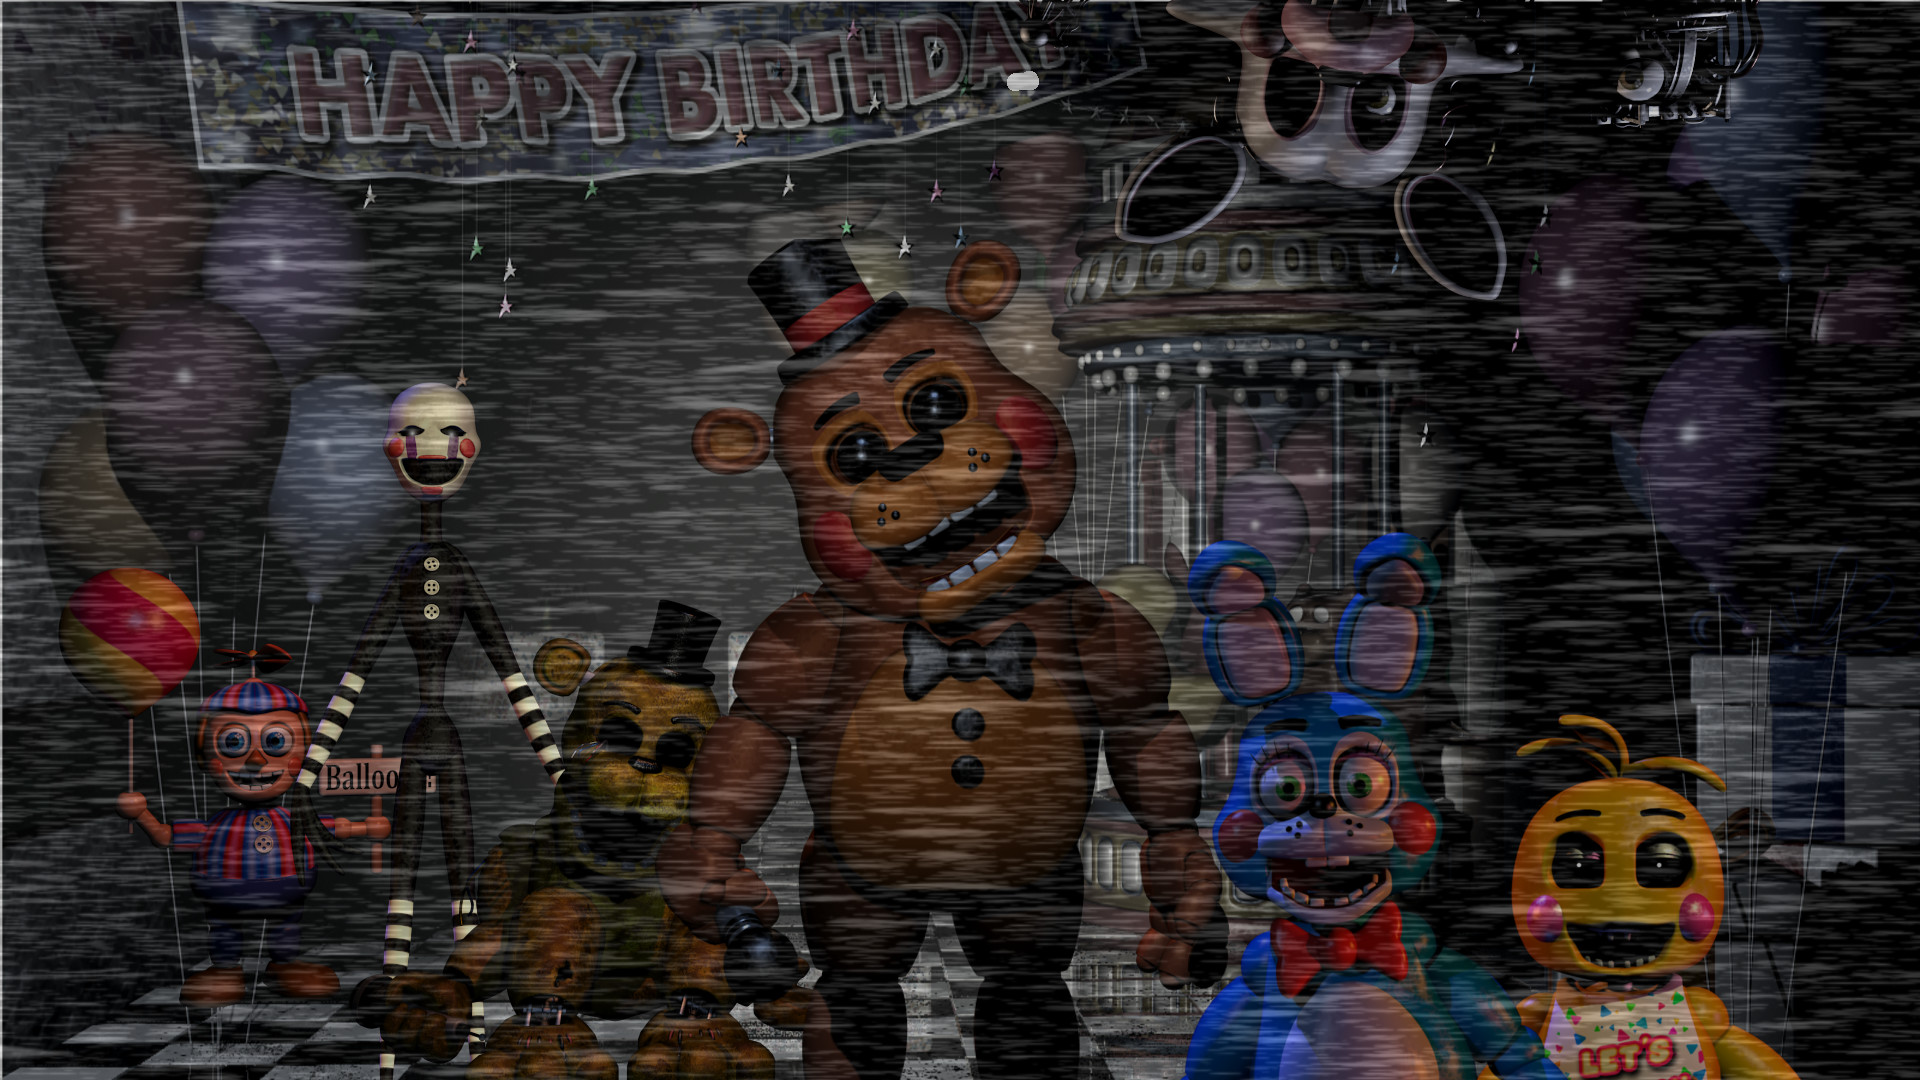 five nights at freddys night 4 download